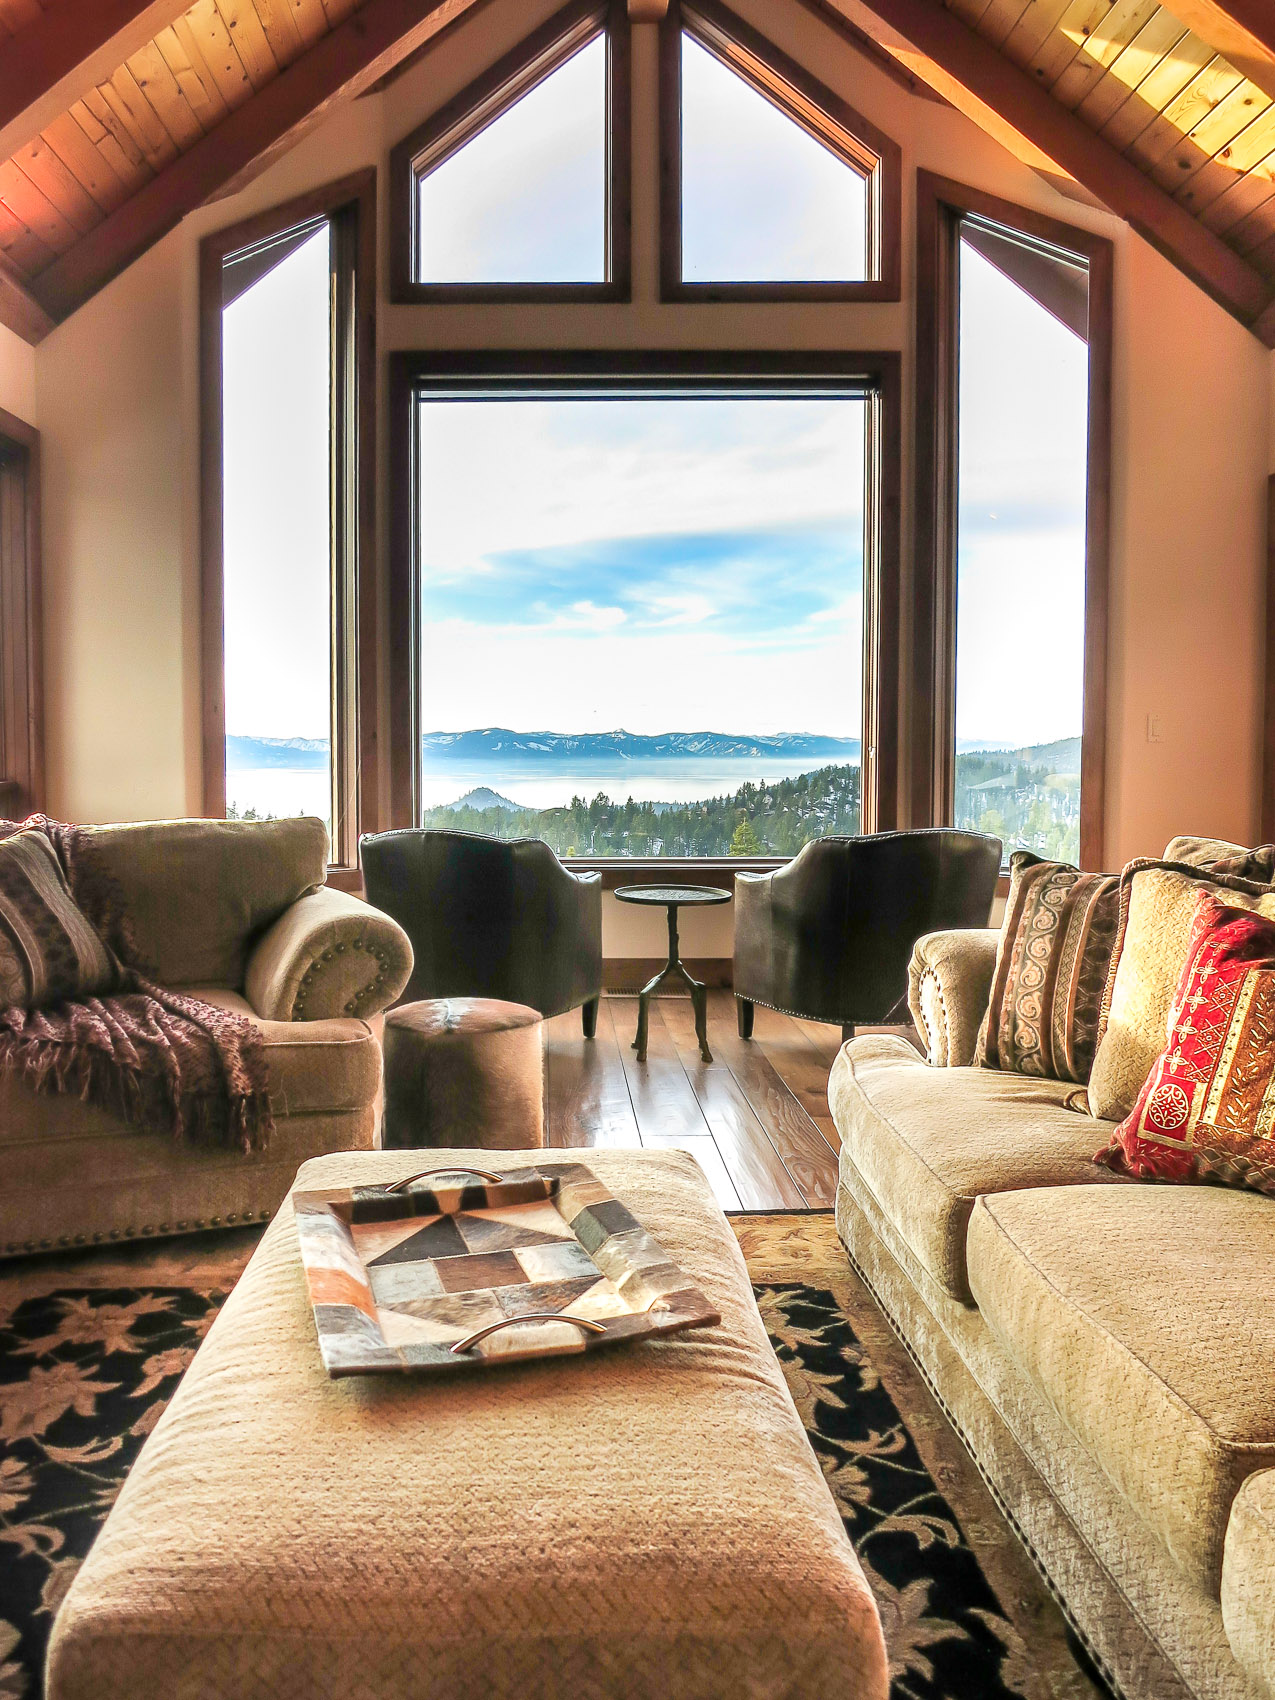 Luxurious interiors at Lake Tahoe can also be welcoming. Photo/Revive Interior Design